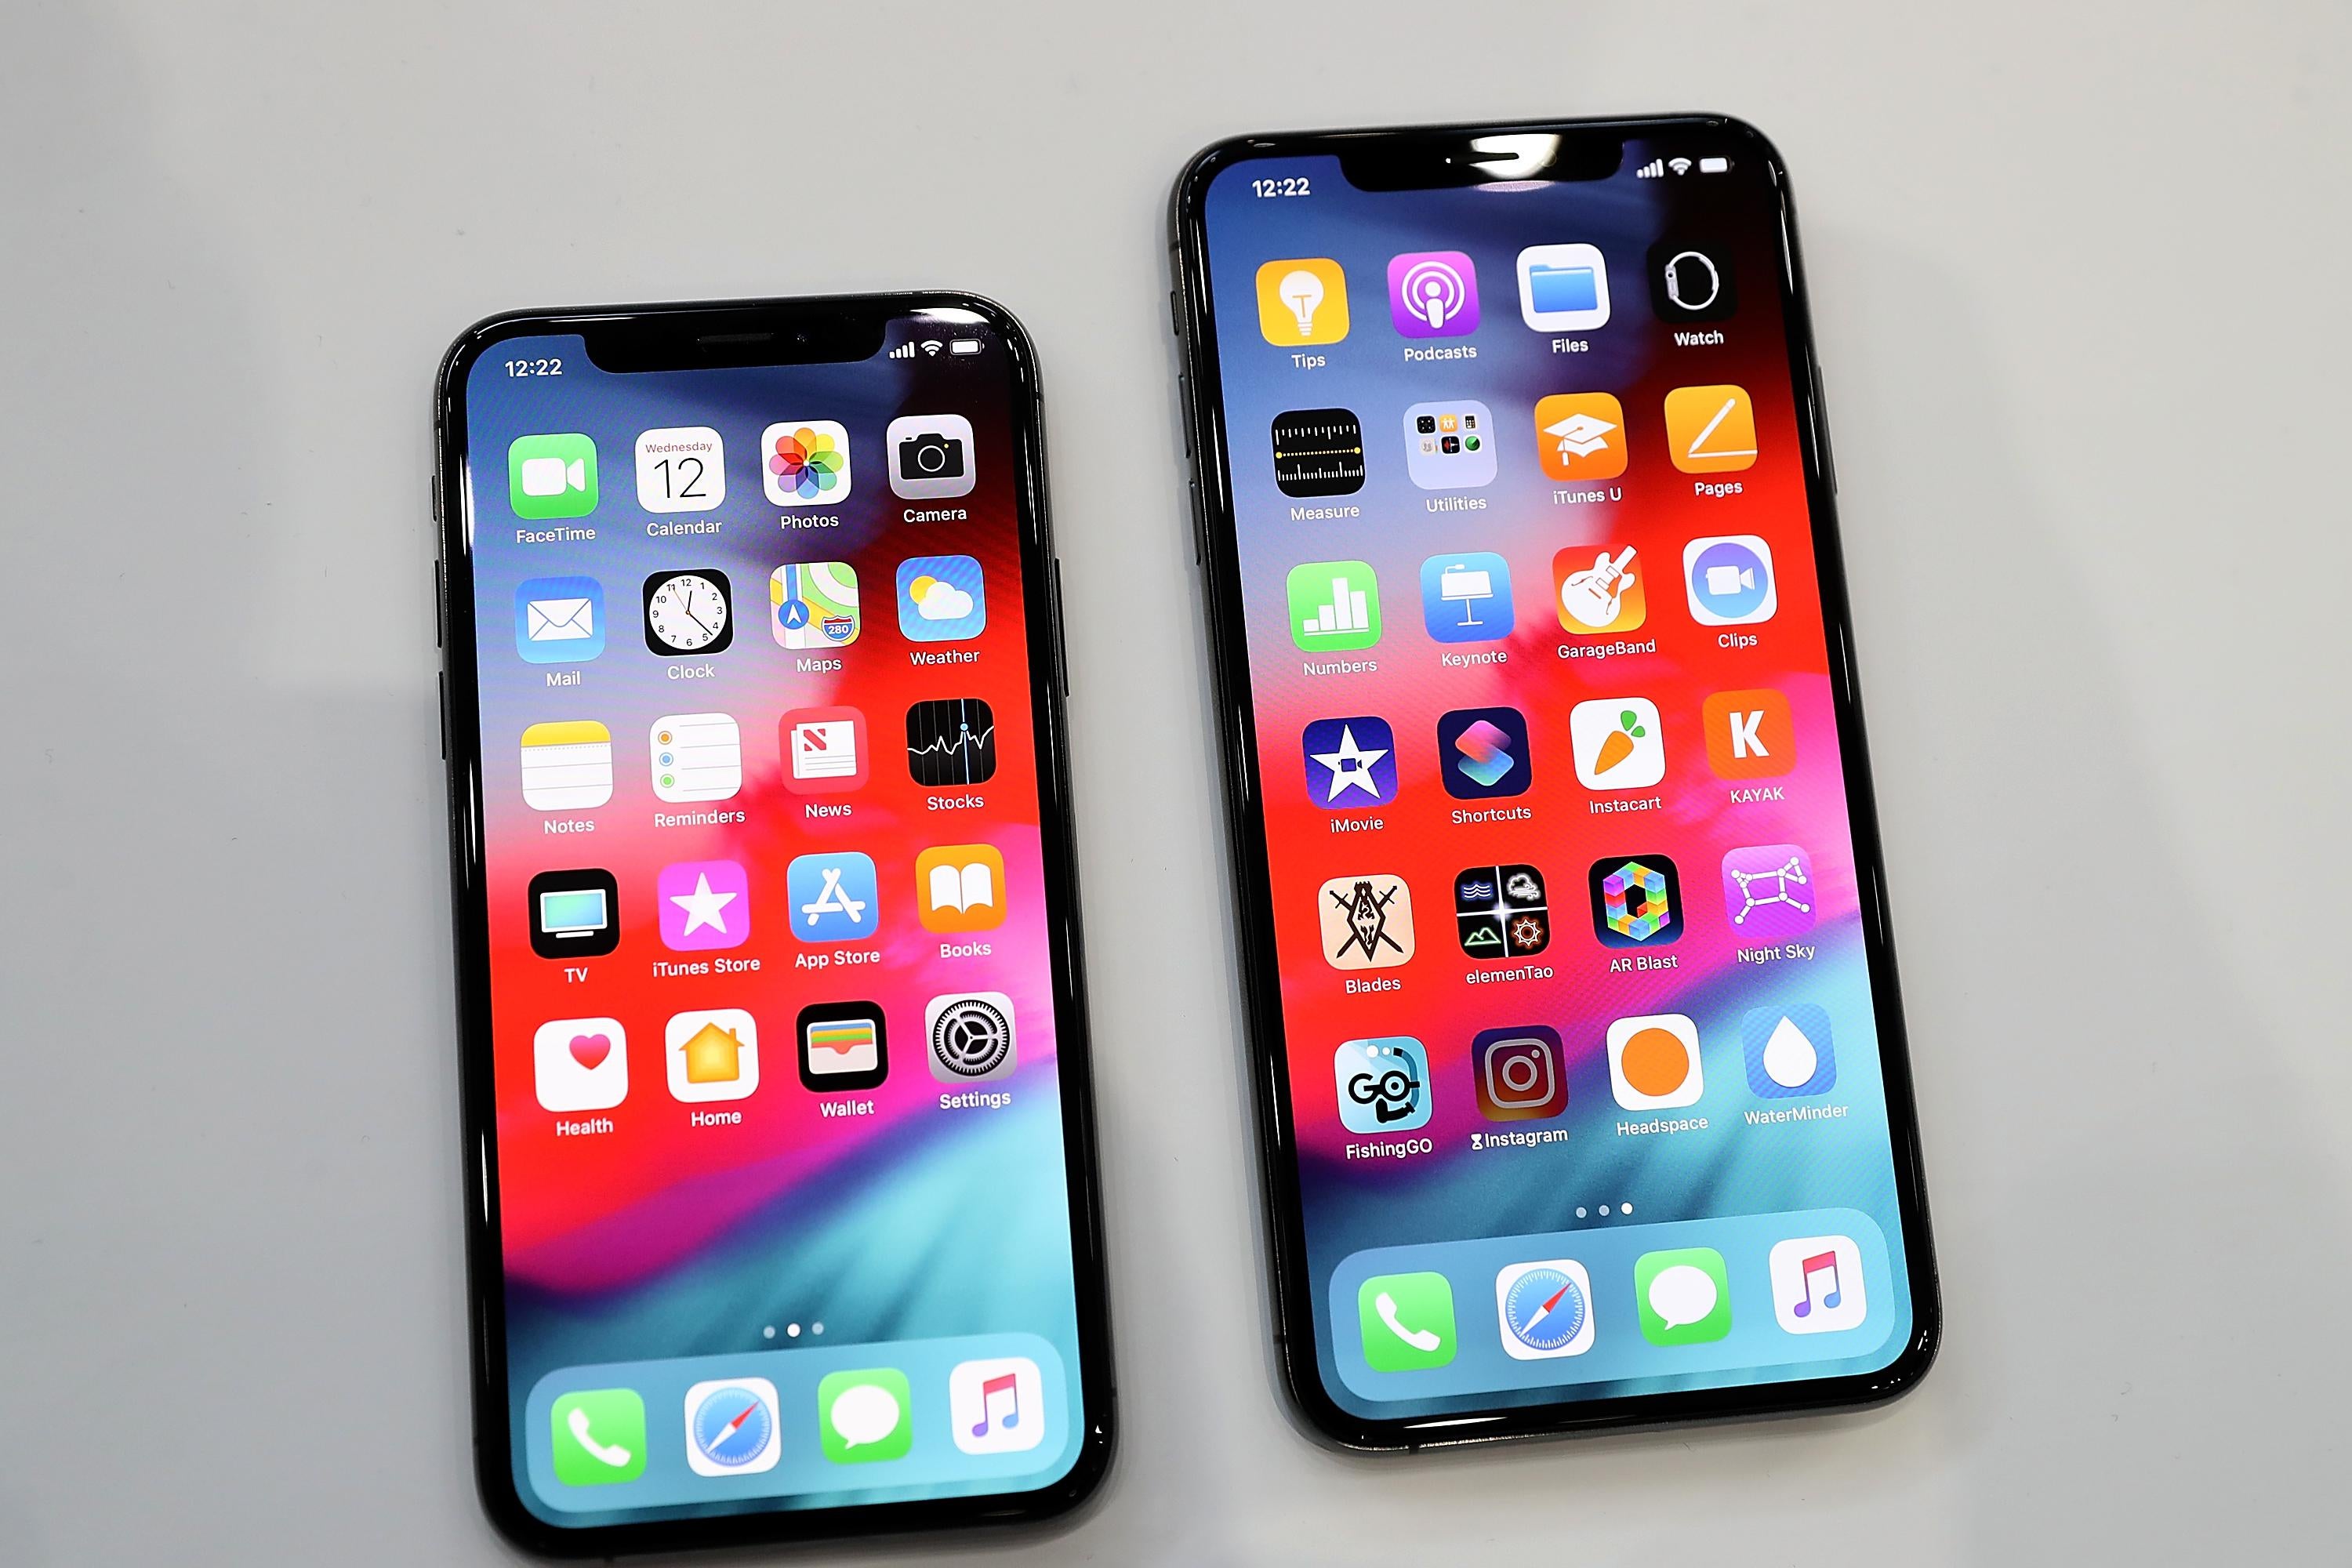 The new Apple iPhone Xs and iPhone Xs Max are displayed during an Apple special event at the Steve Jobs Theatre on September 12, 2018 in Cupertino, California.  Apple released three new versions of the iPhone and an update Apple Watch.  